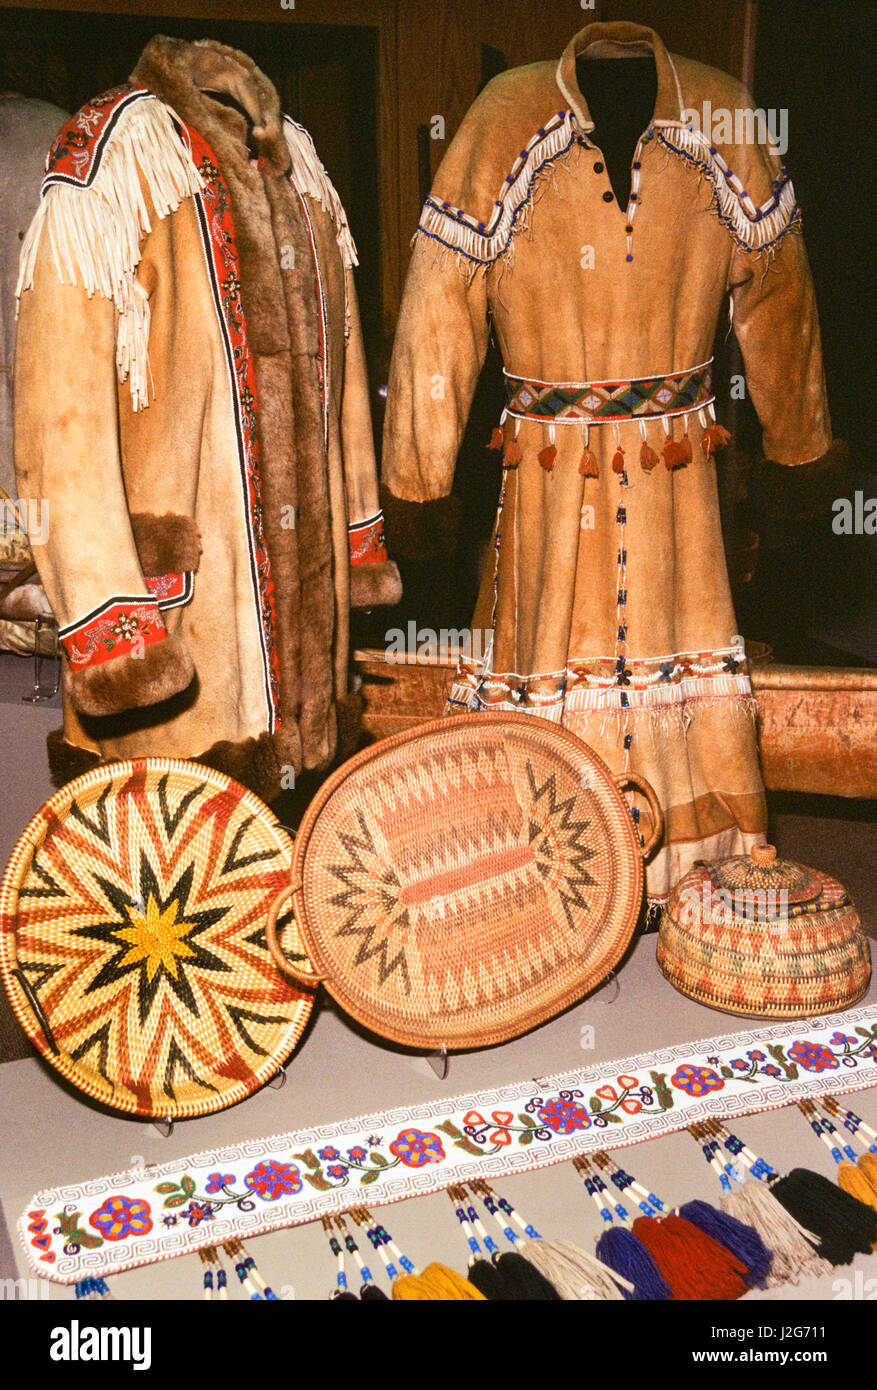 Traditional Athabaskan clothing made from moose hide decorated with fur trim and beadwork. Baskets and beaded belt strip compliment the museum display. Alaska Stock Photo